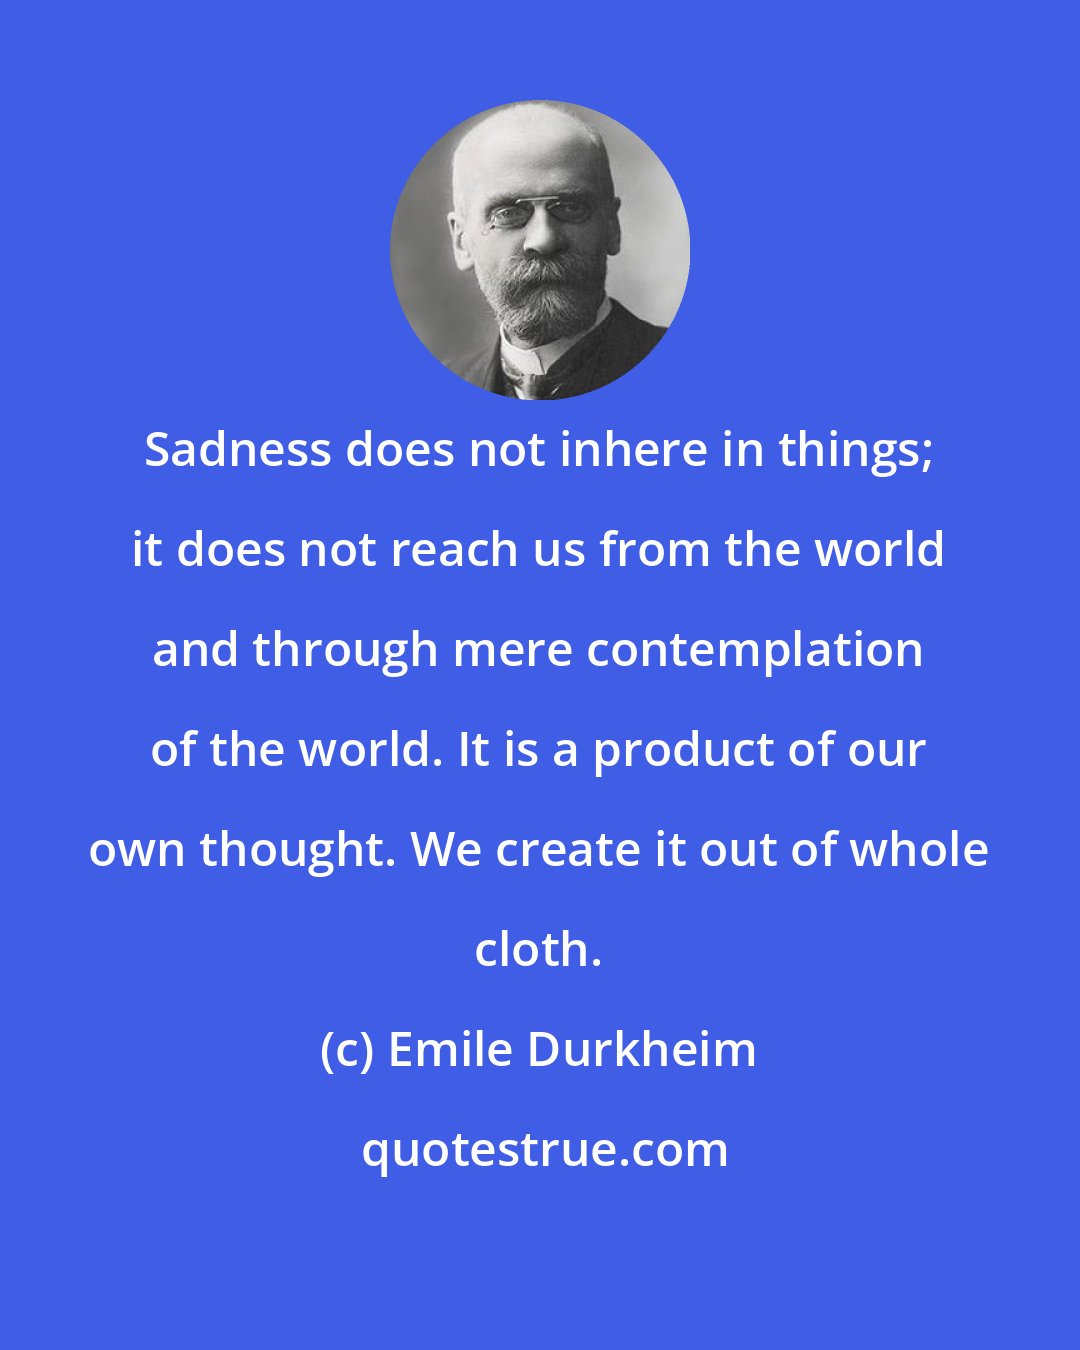 Emile Durkheim: Sadness does not inhere in things; it does not reach us from the world and through mere contemplation of the world. It is a product of our own thought. We create it out of whole cloth.